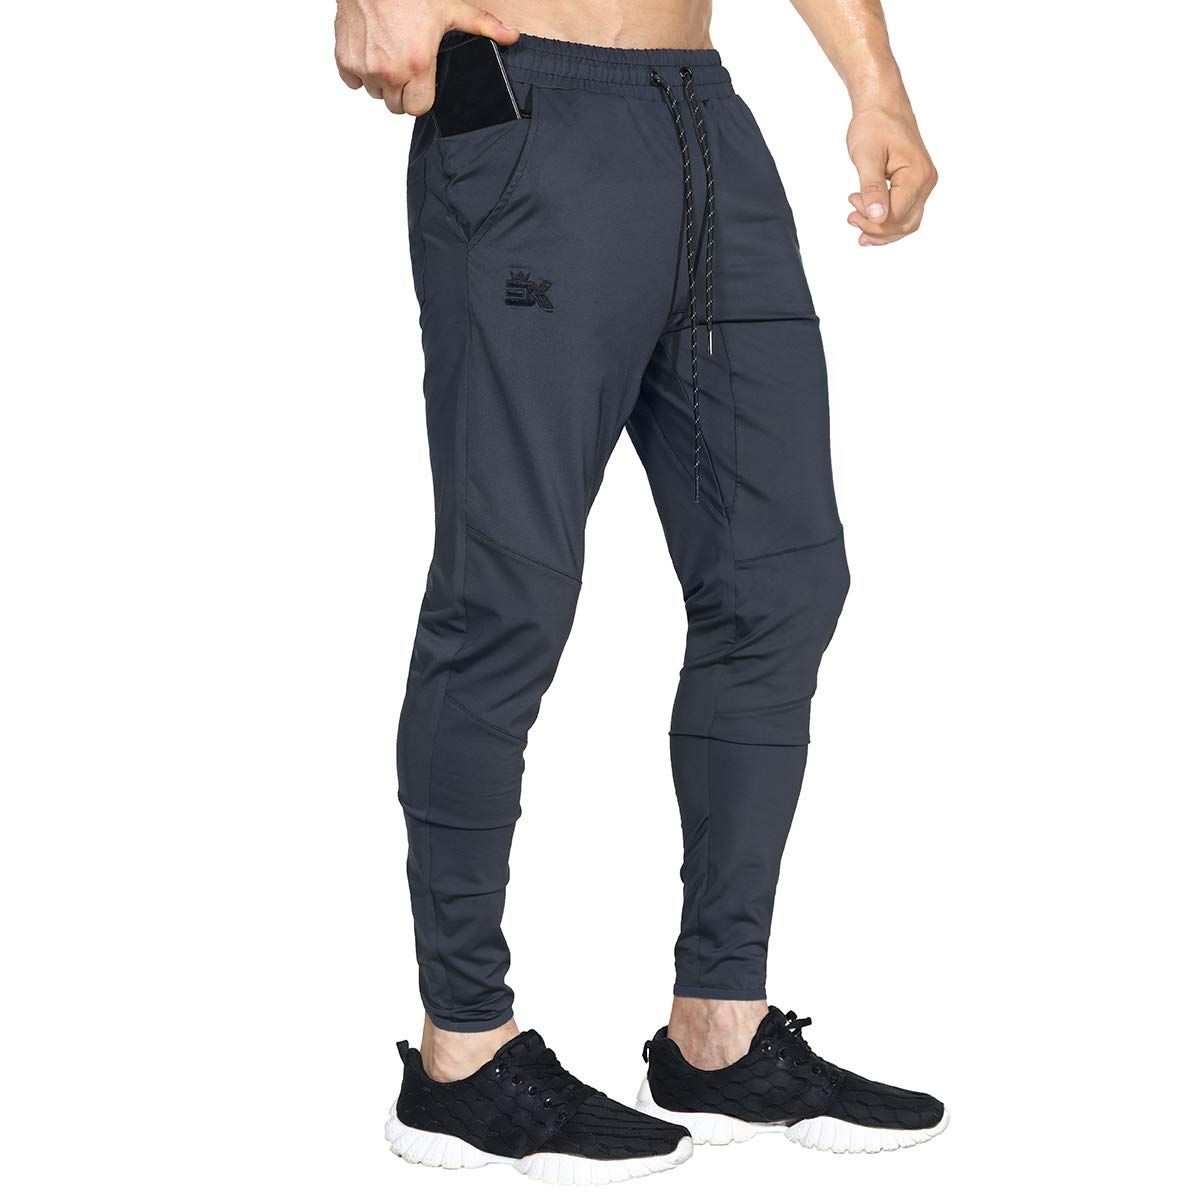 The Best Travel Pants for Women of 2023 Tested and Reviewed